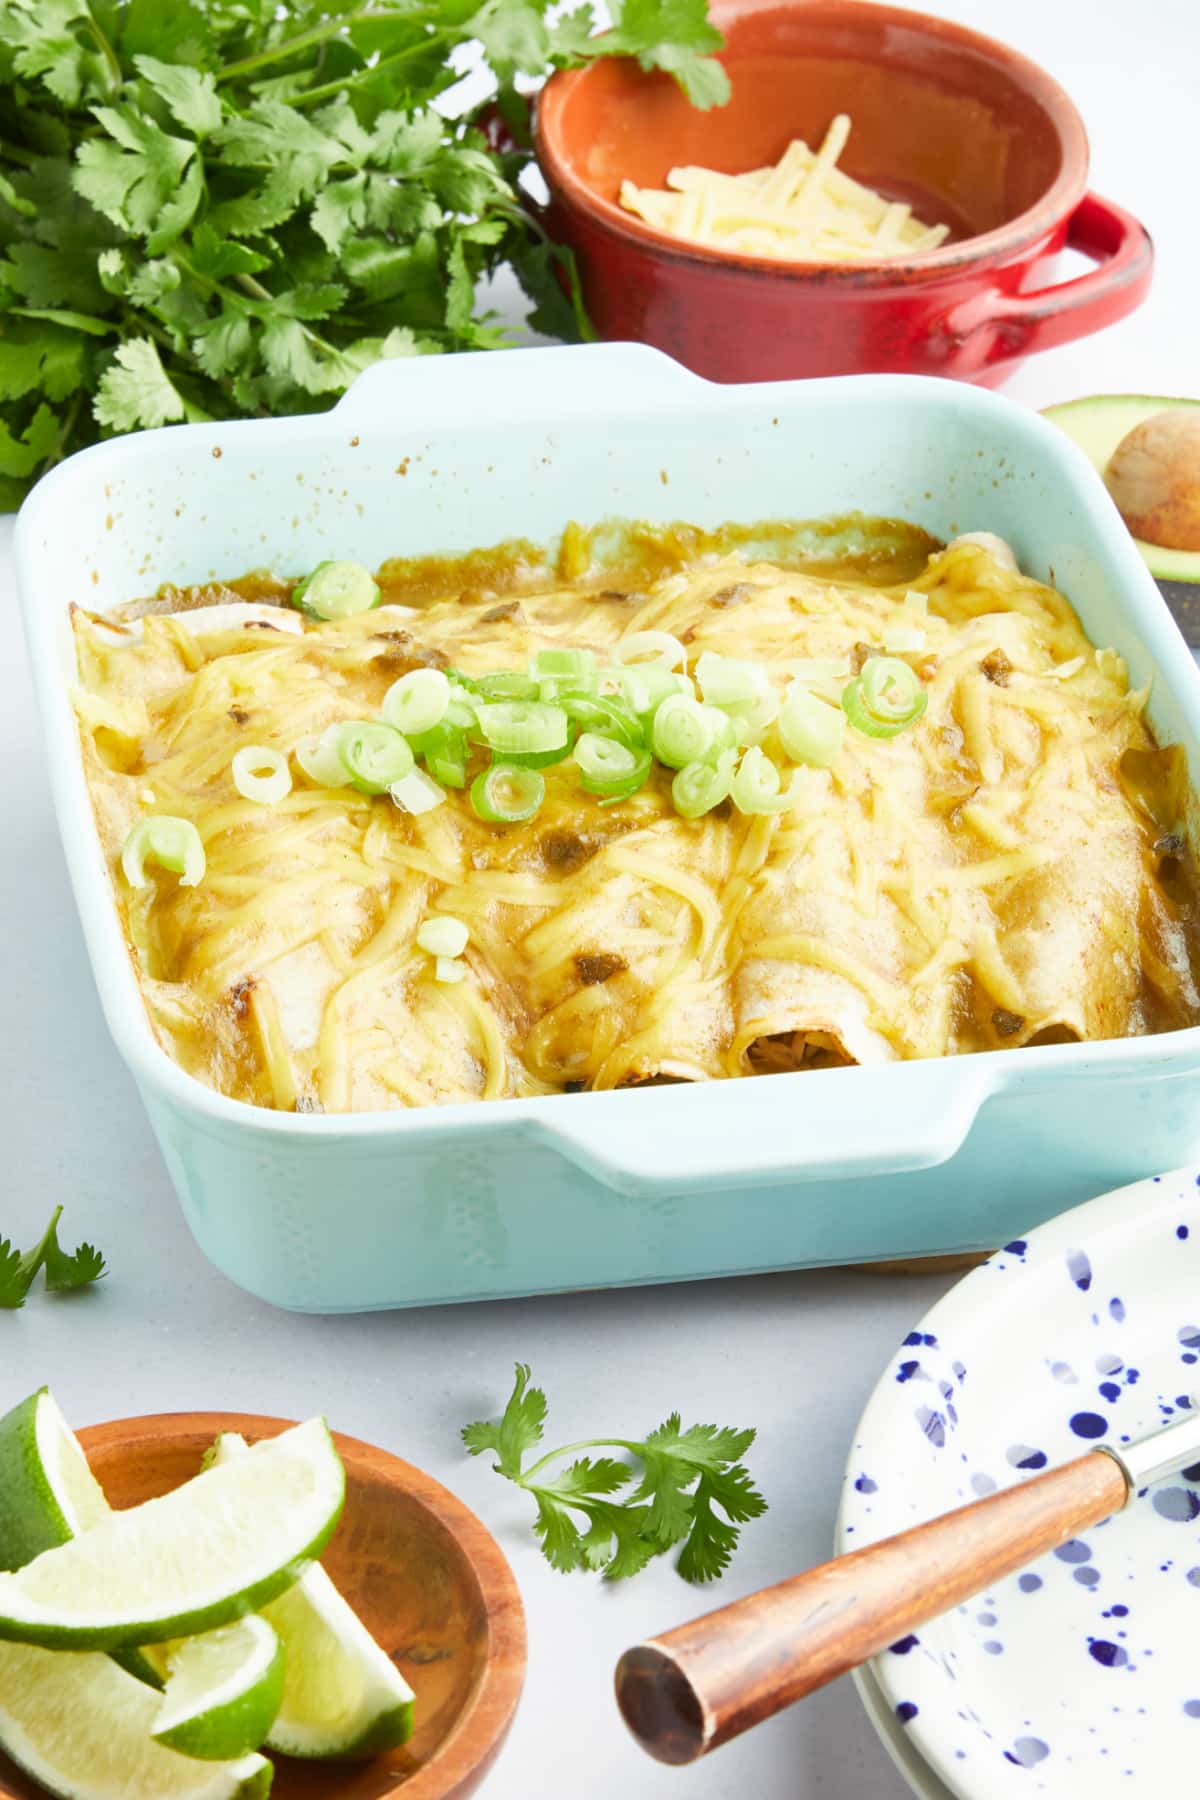 A baking dish of enchiladas sit on a white tabletop next to a stack of serving plates, bowls of lime wedges and shredded cheese, and a bunch of parsley.